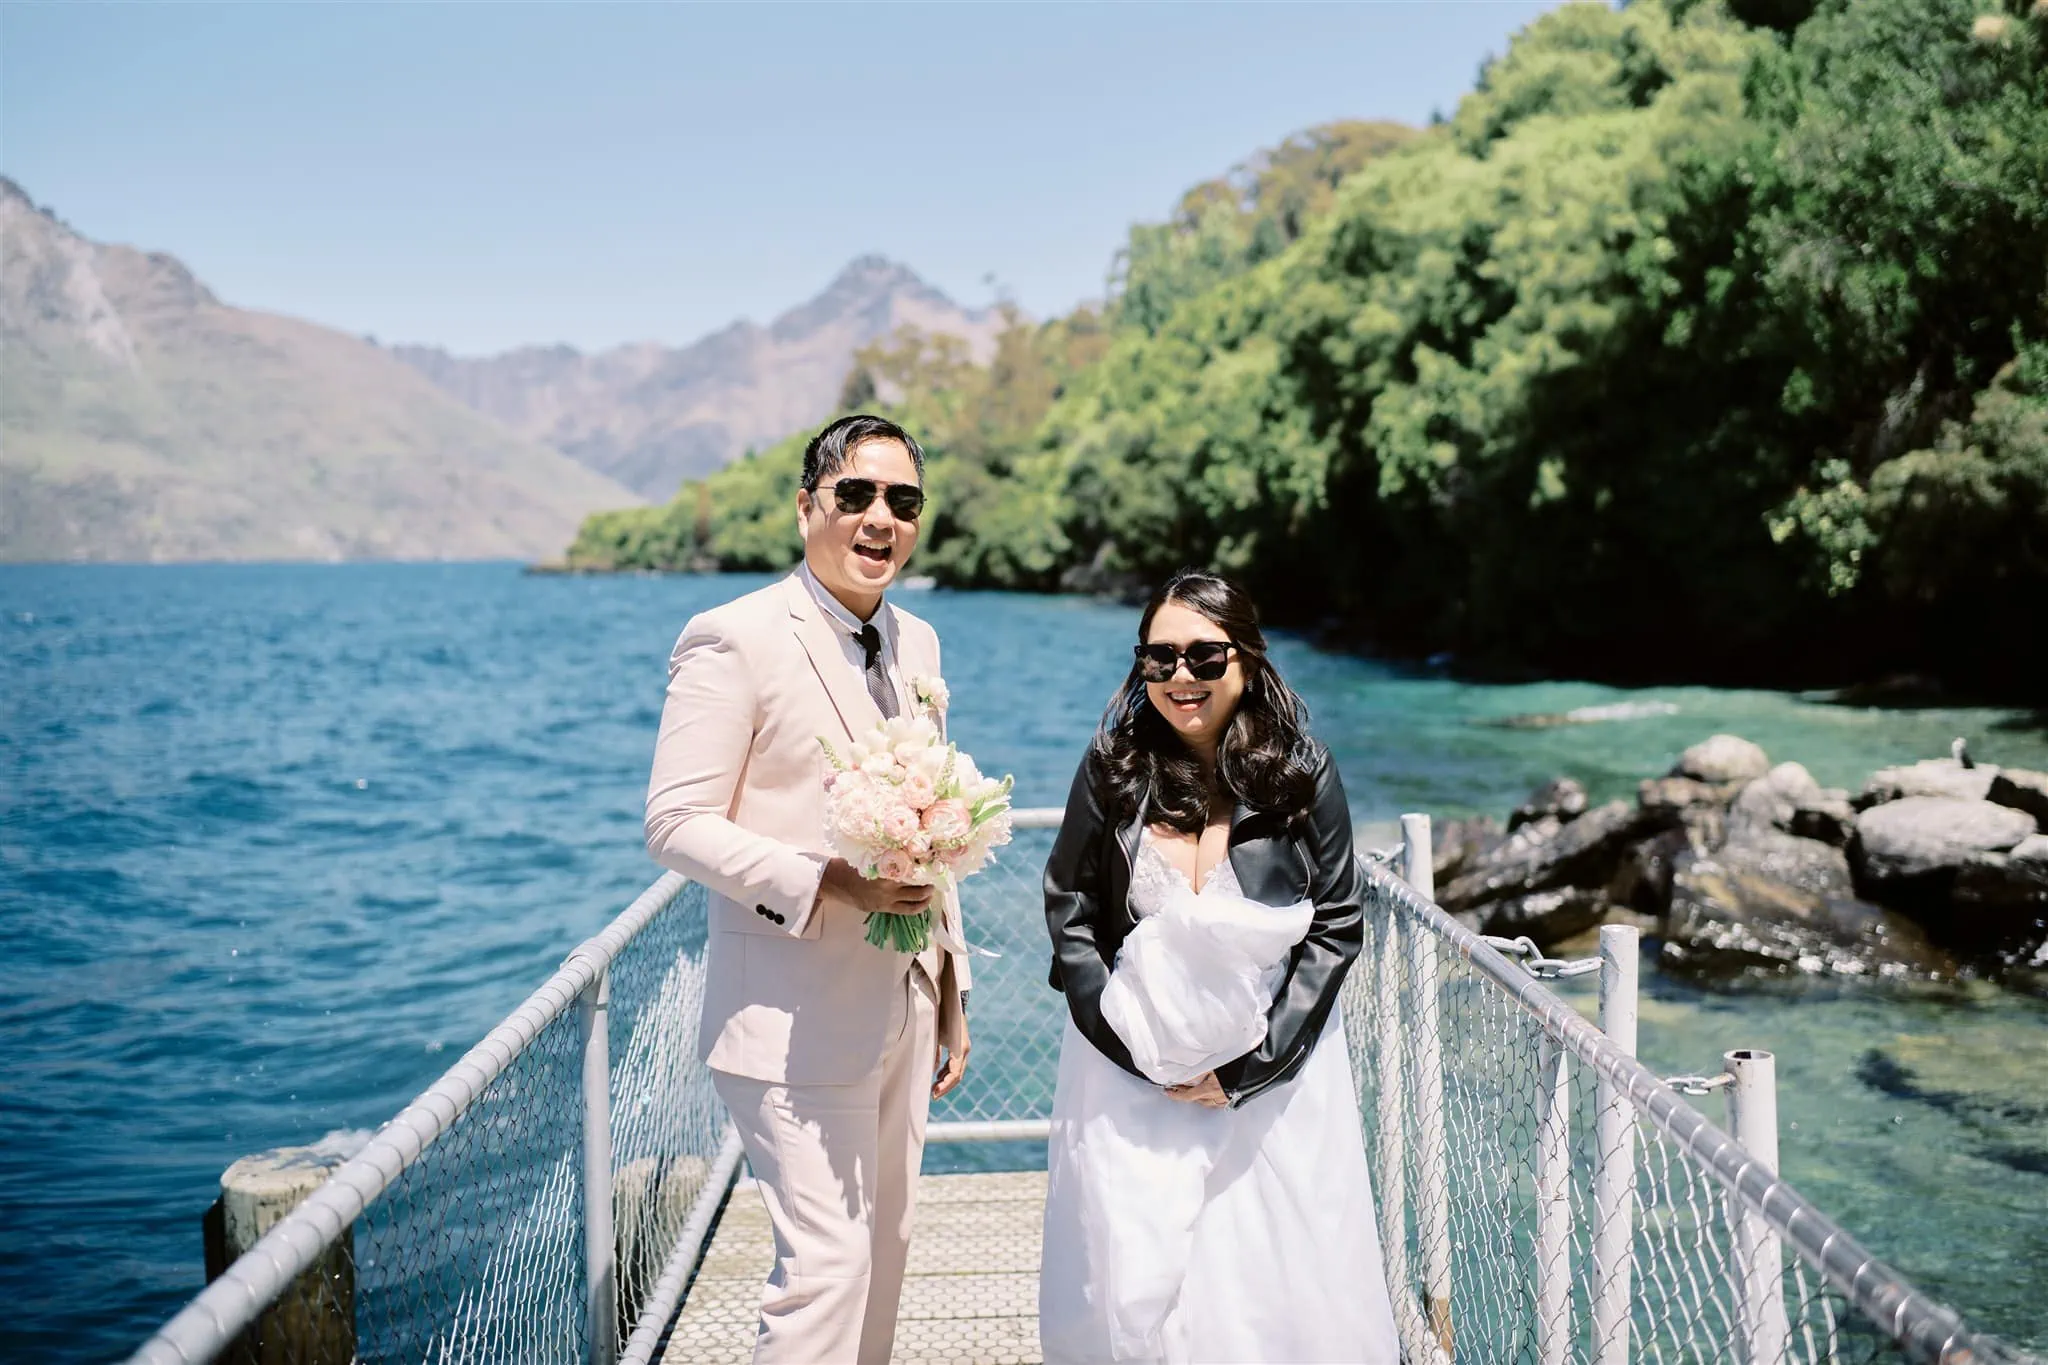 Queenstown Elopement Heli Wedding Photographer クイーンズタウン結婚式 | A Queenstown elopement - a bride and groom standing on a dock in front of a lake.